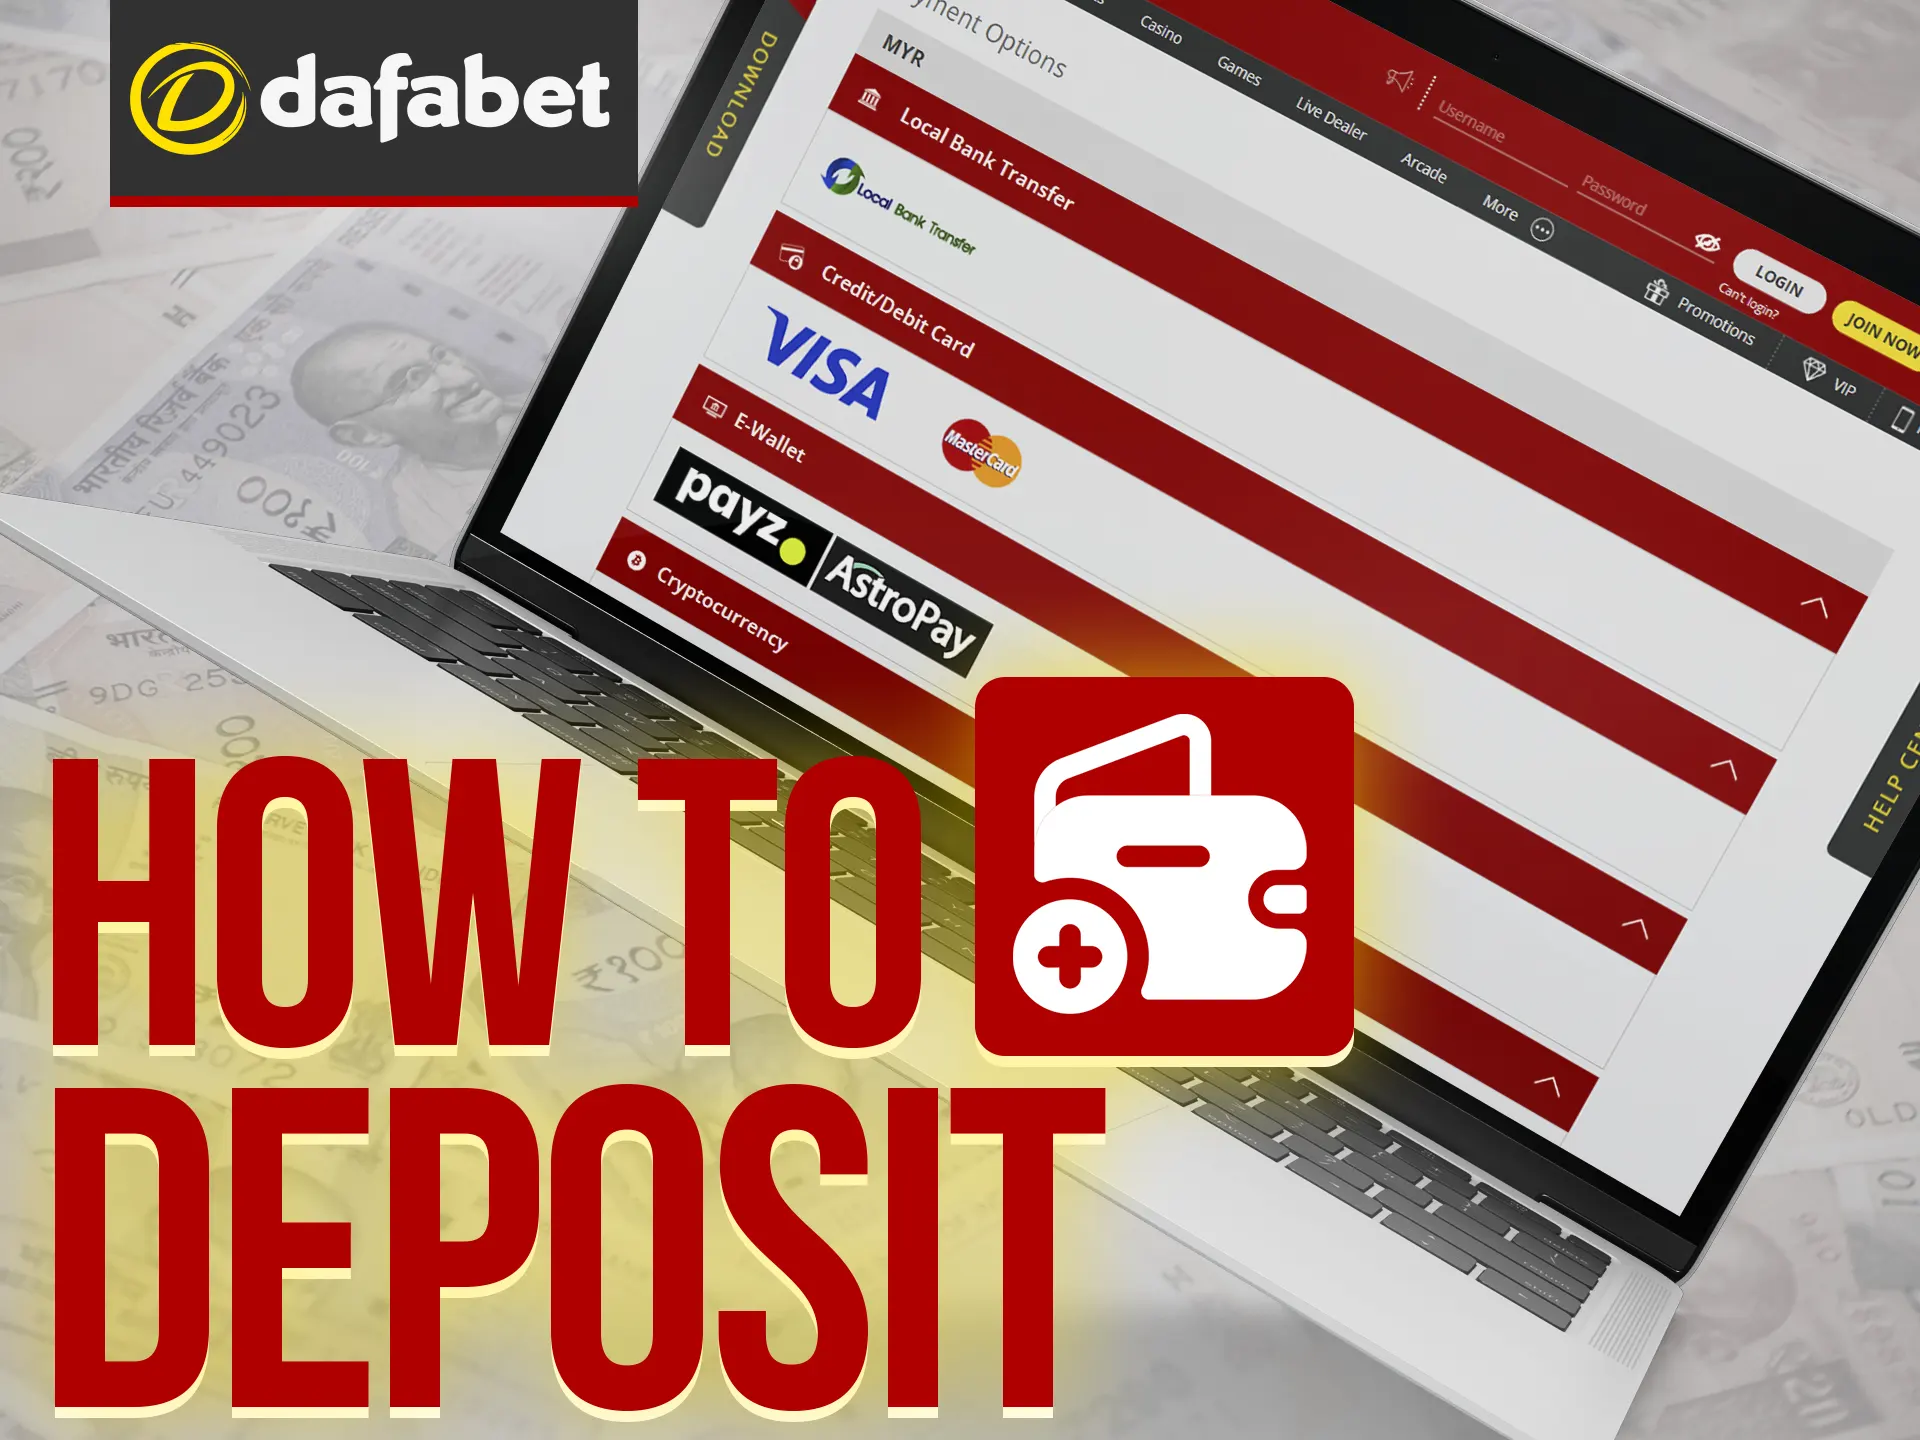 Visit the Dafabet website or app, sign in, select payment, and confirm transaction.